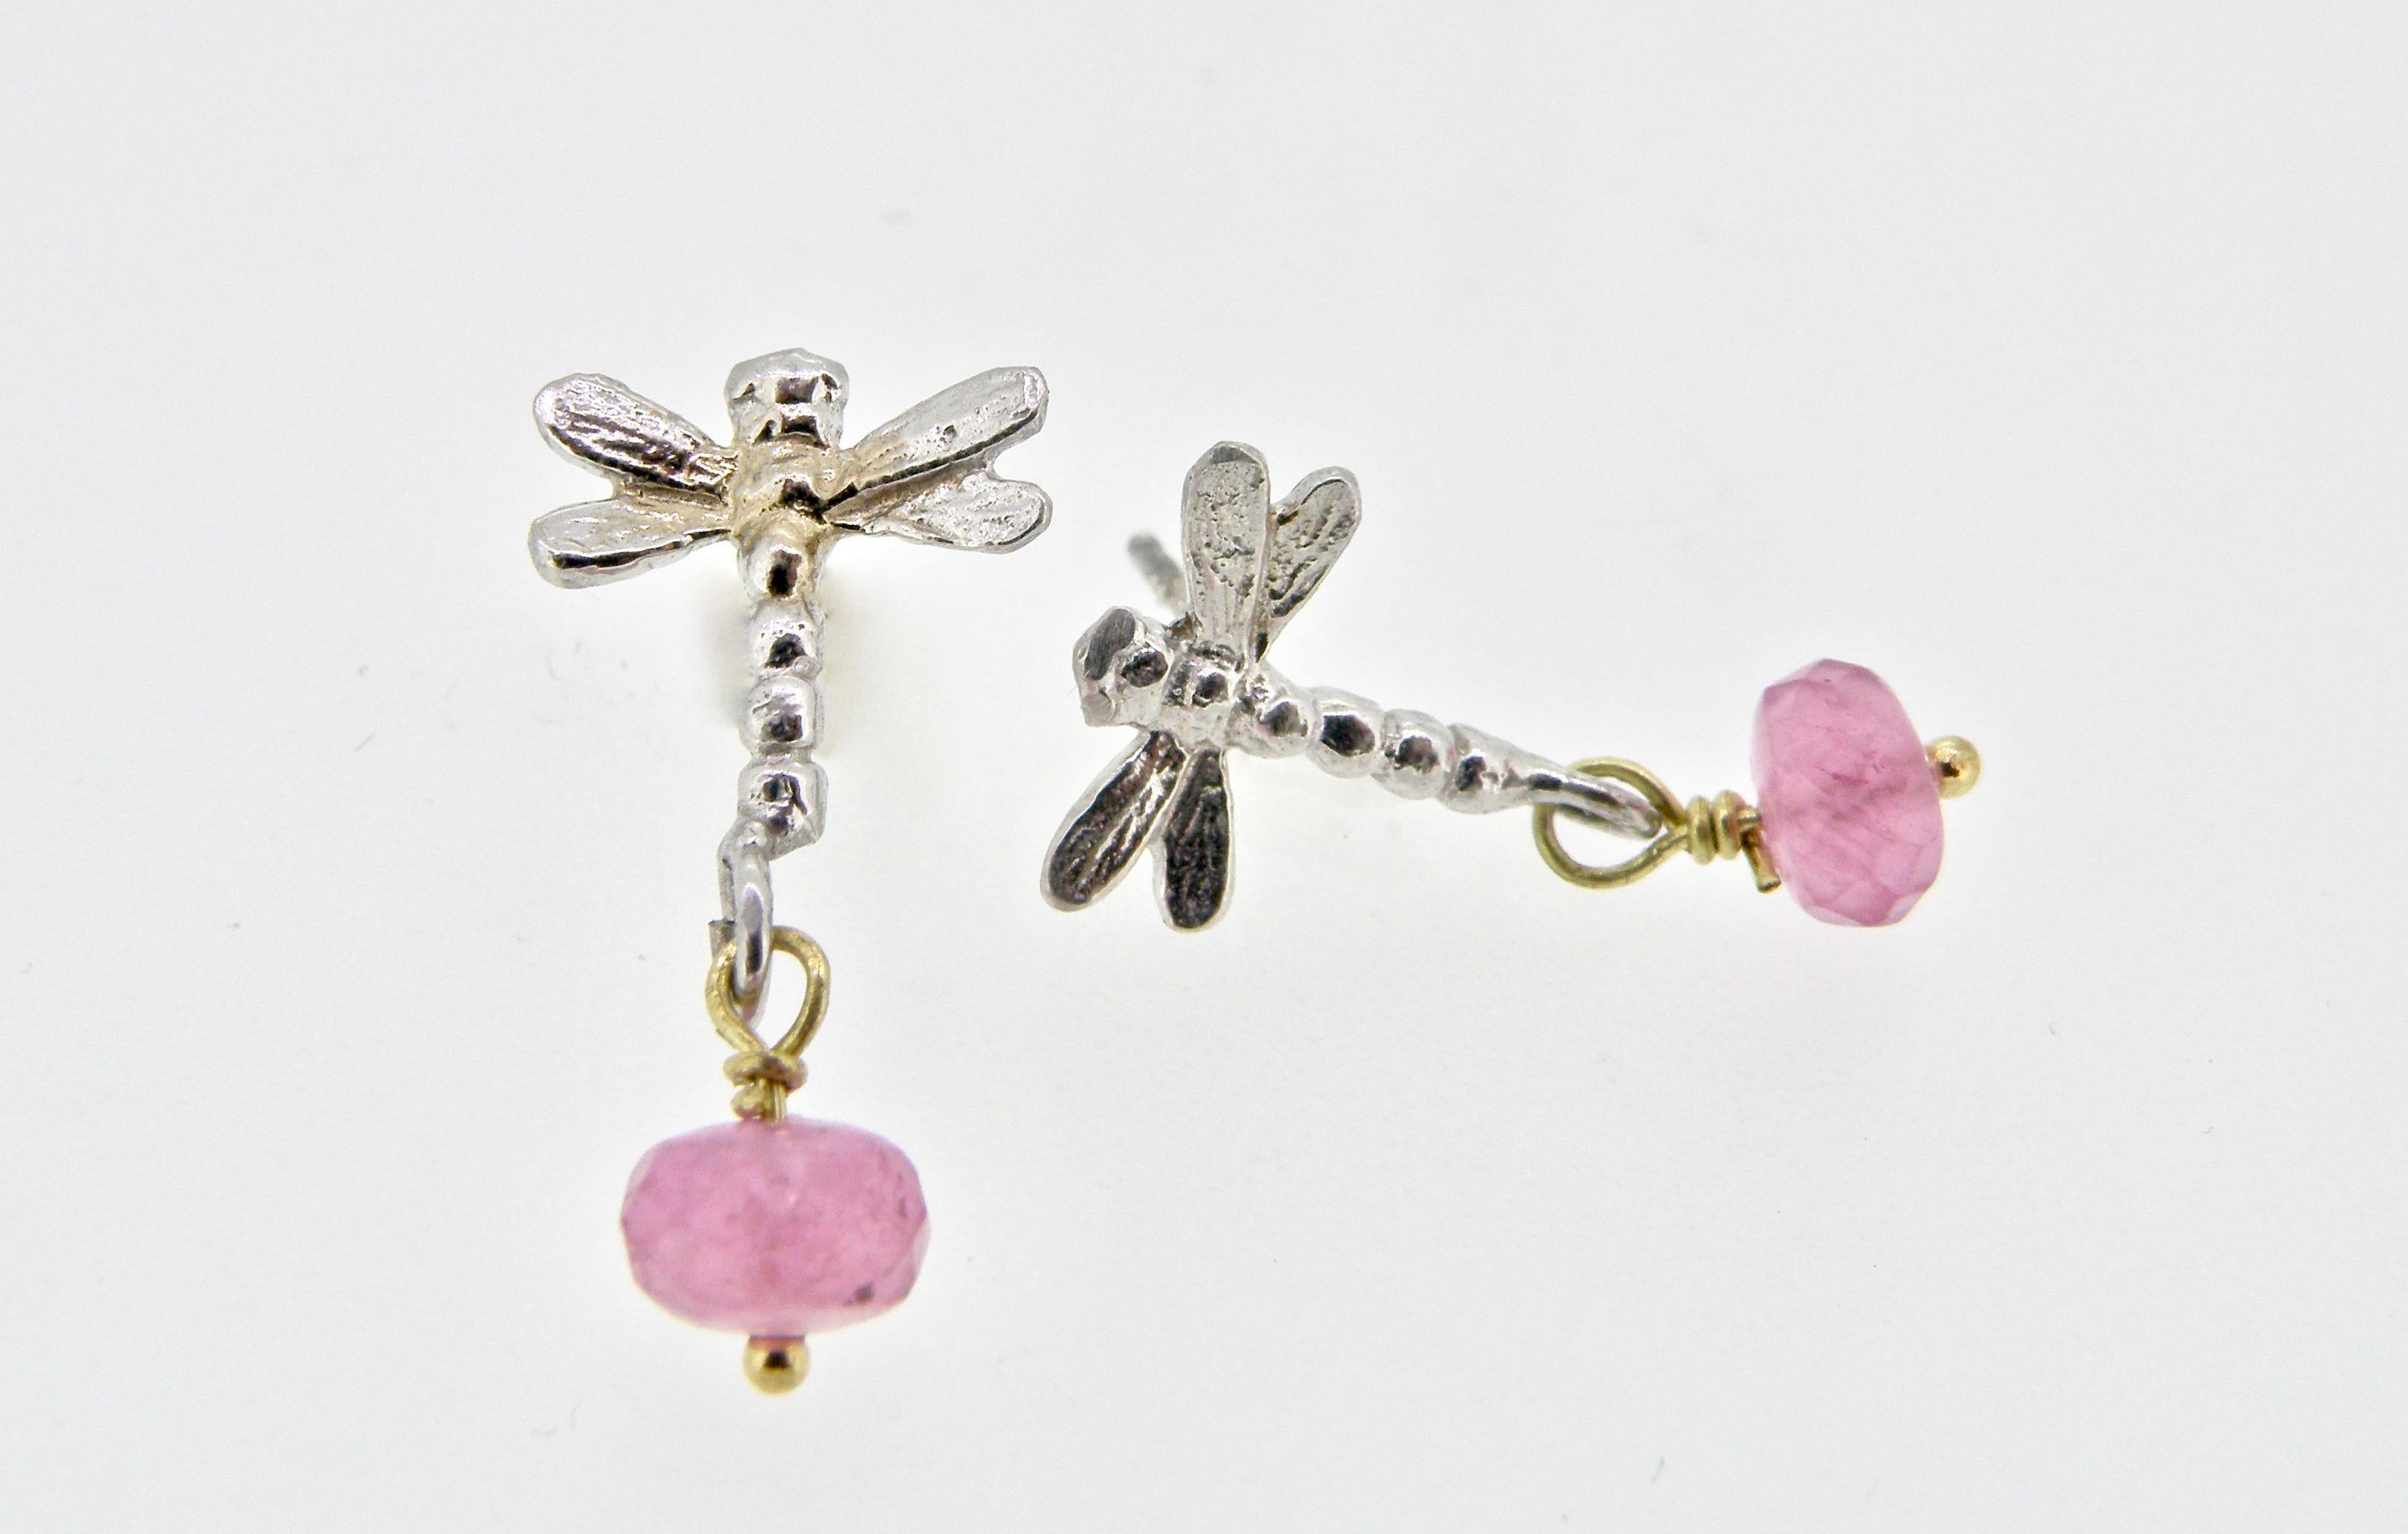 18 karat Dragonfly earrings with pink sapphire drops